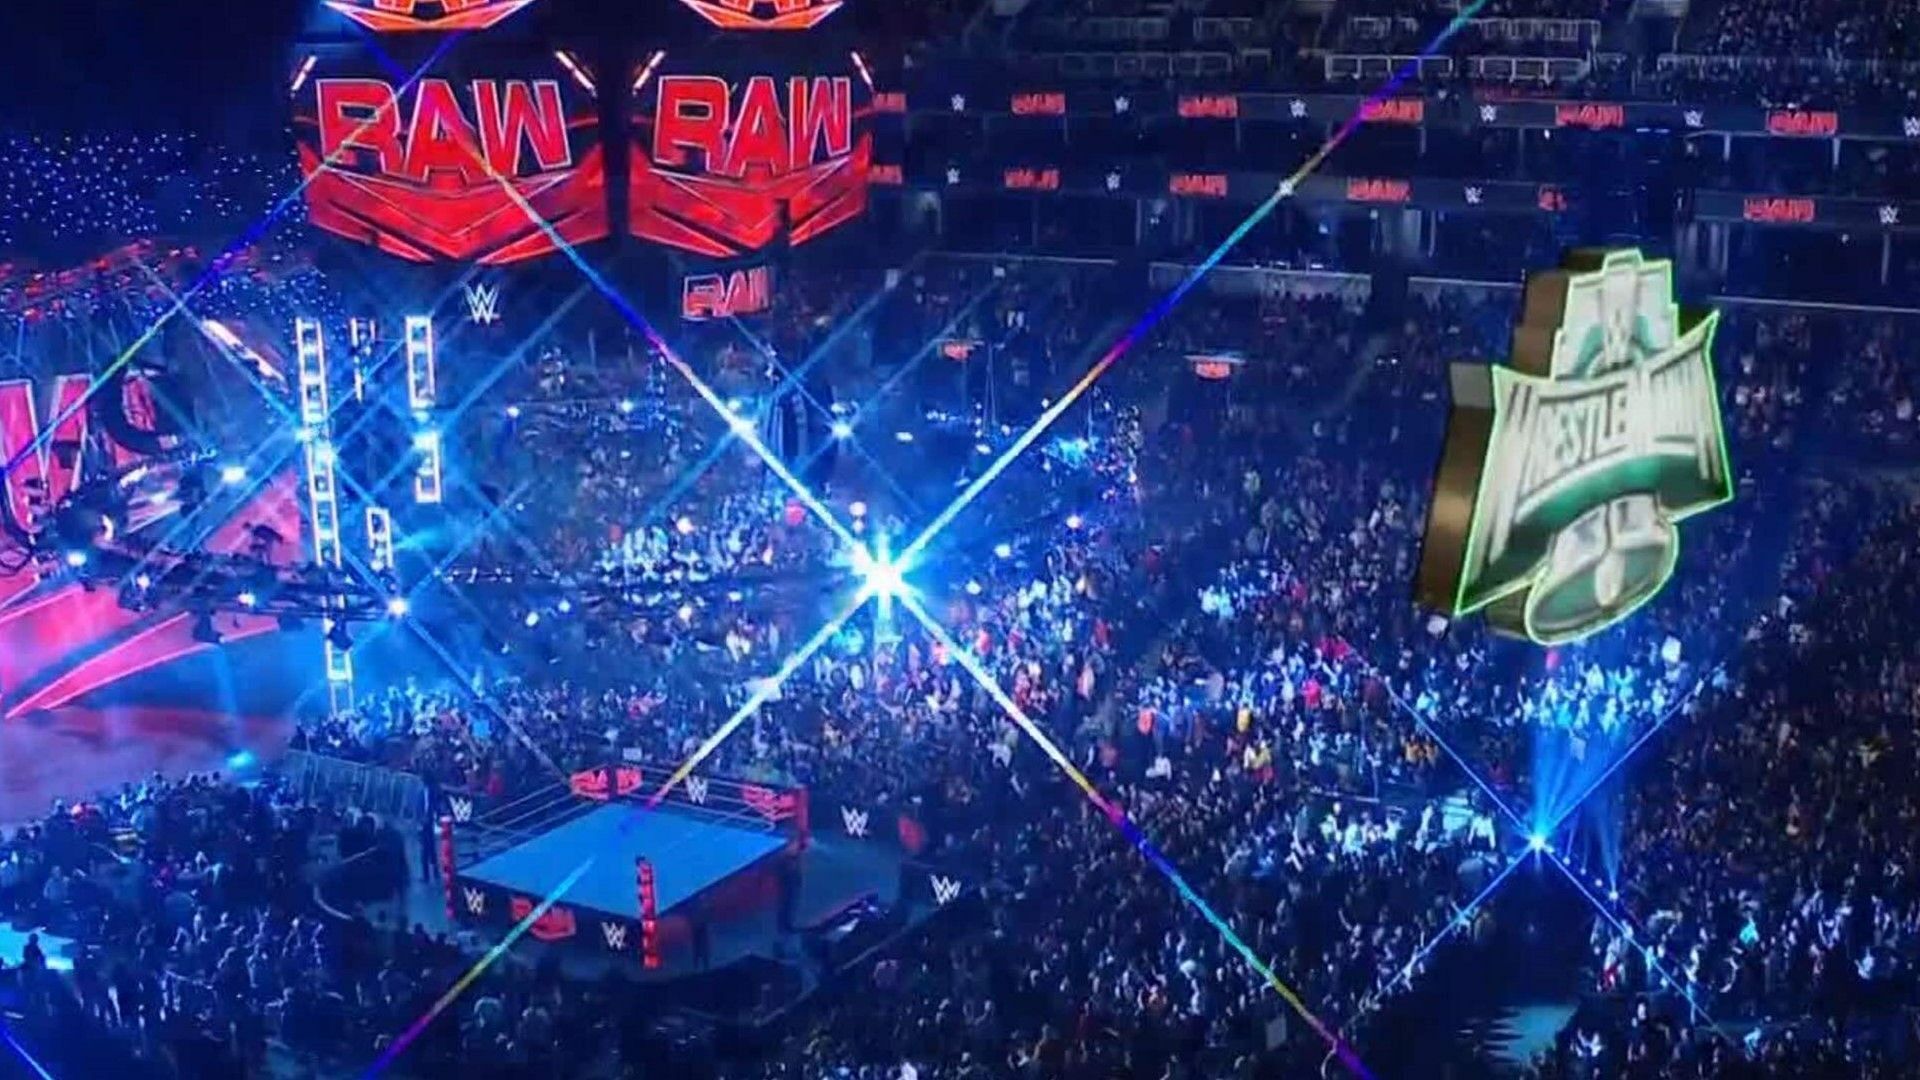 The WWE Universe packs their arena for RAW on The Road to WrestleMania XL